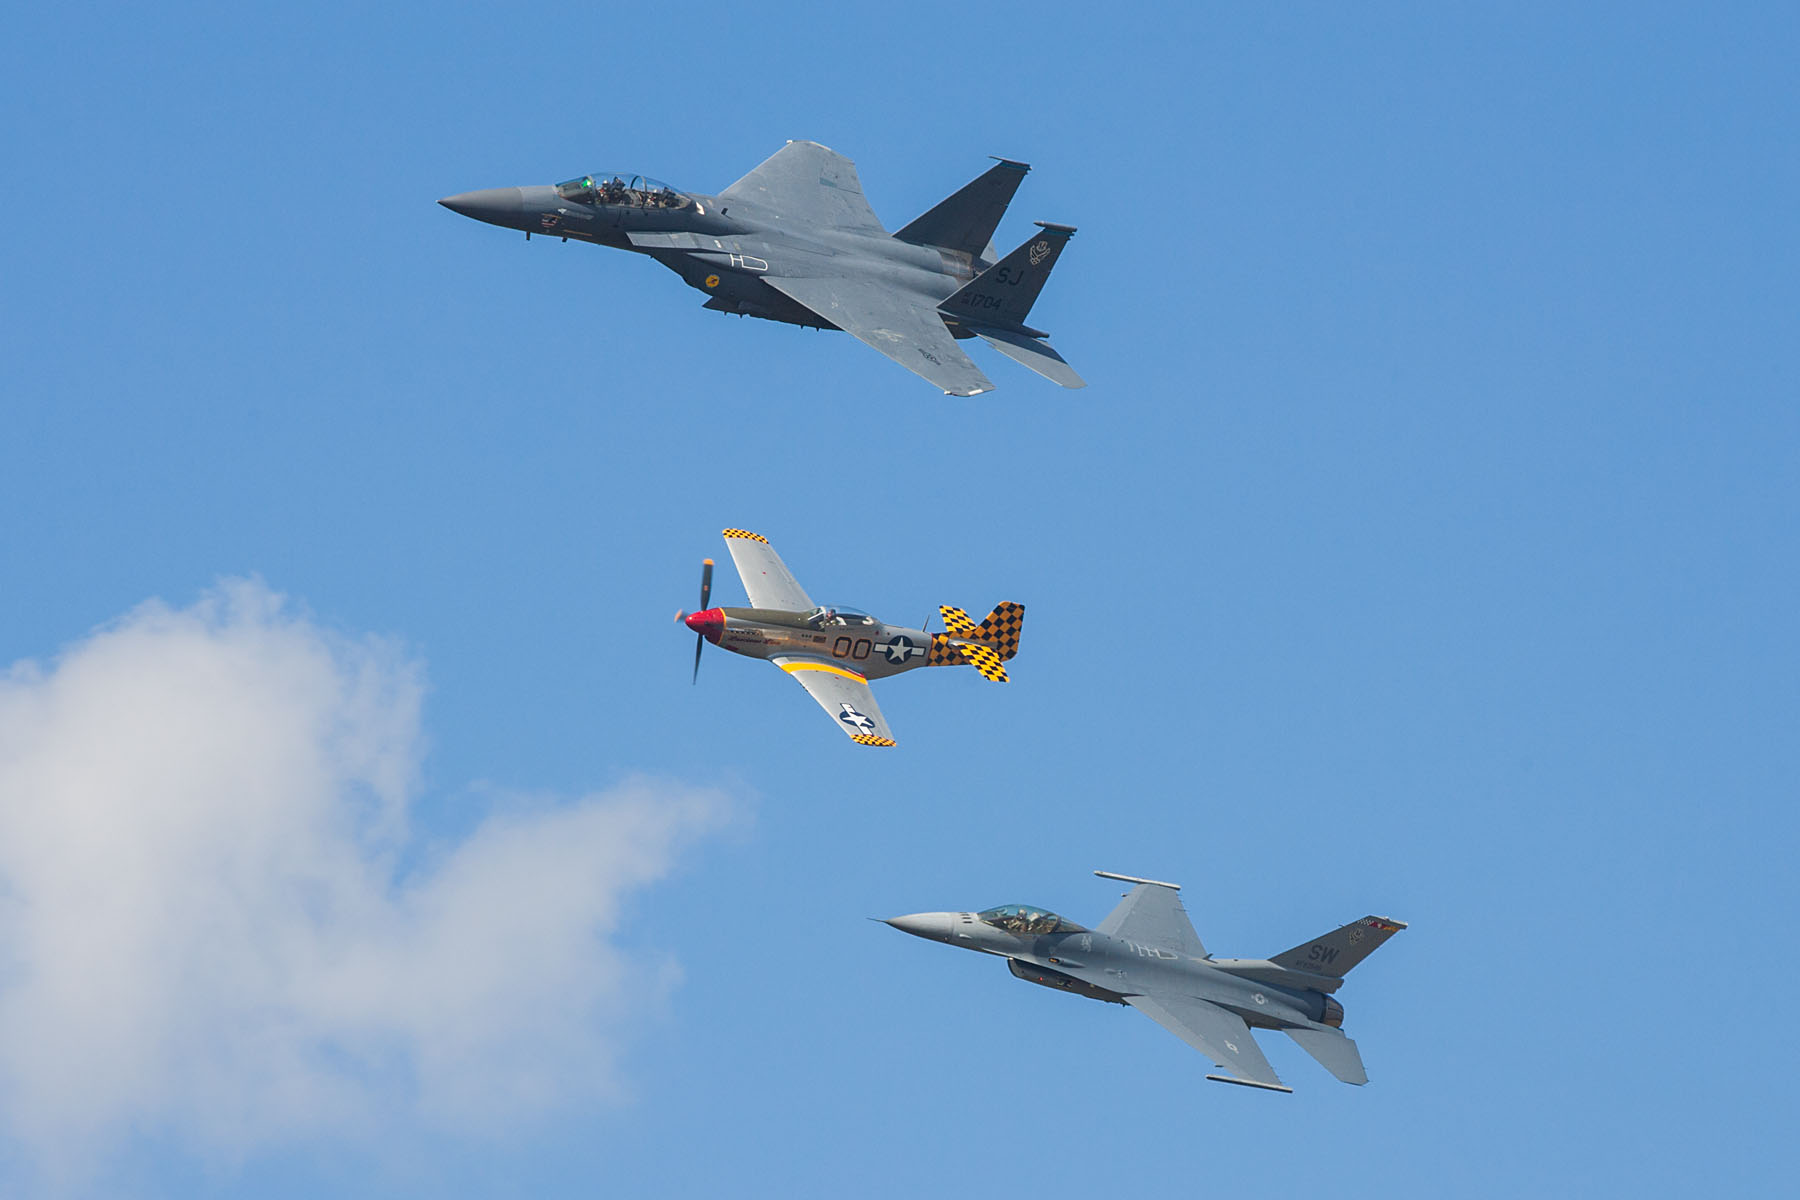 Heritage Flight, F-15 Eagle, P-51 Mustang, and F-16 Falcon, TICO Warbirds Air Show, Titusville, Florida.  Click for next photo.